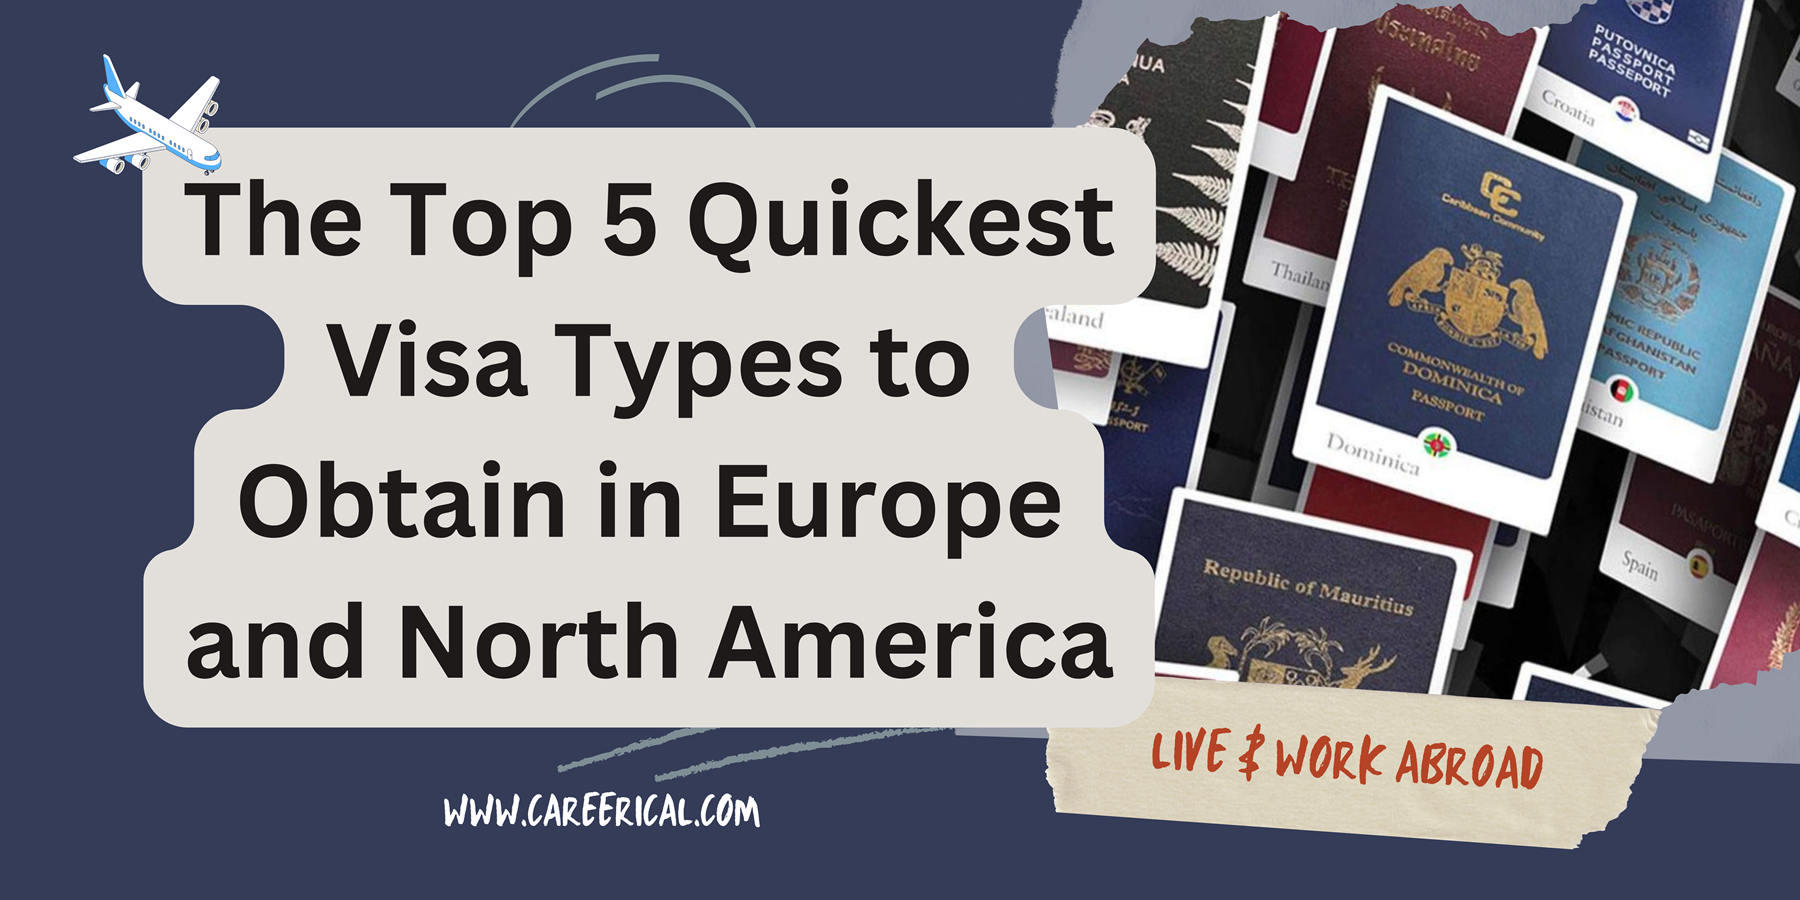 The Top 5 Quickest Visa Types to Obtain in Europe and North America